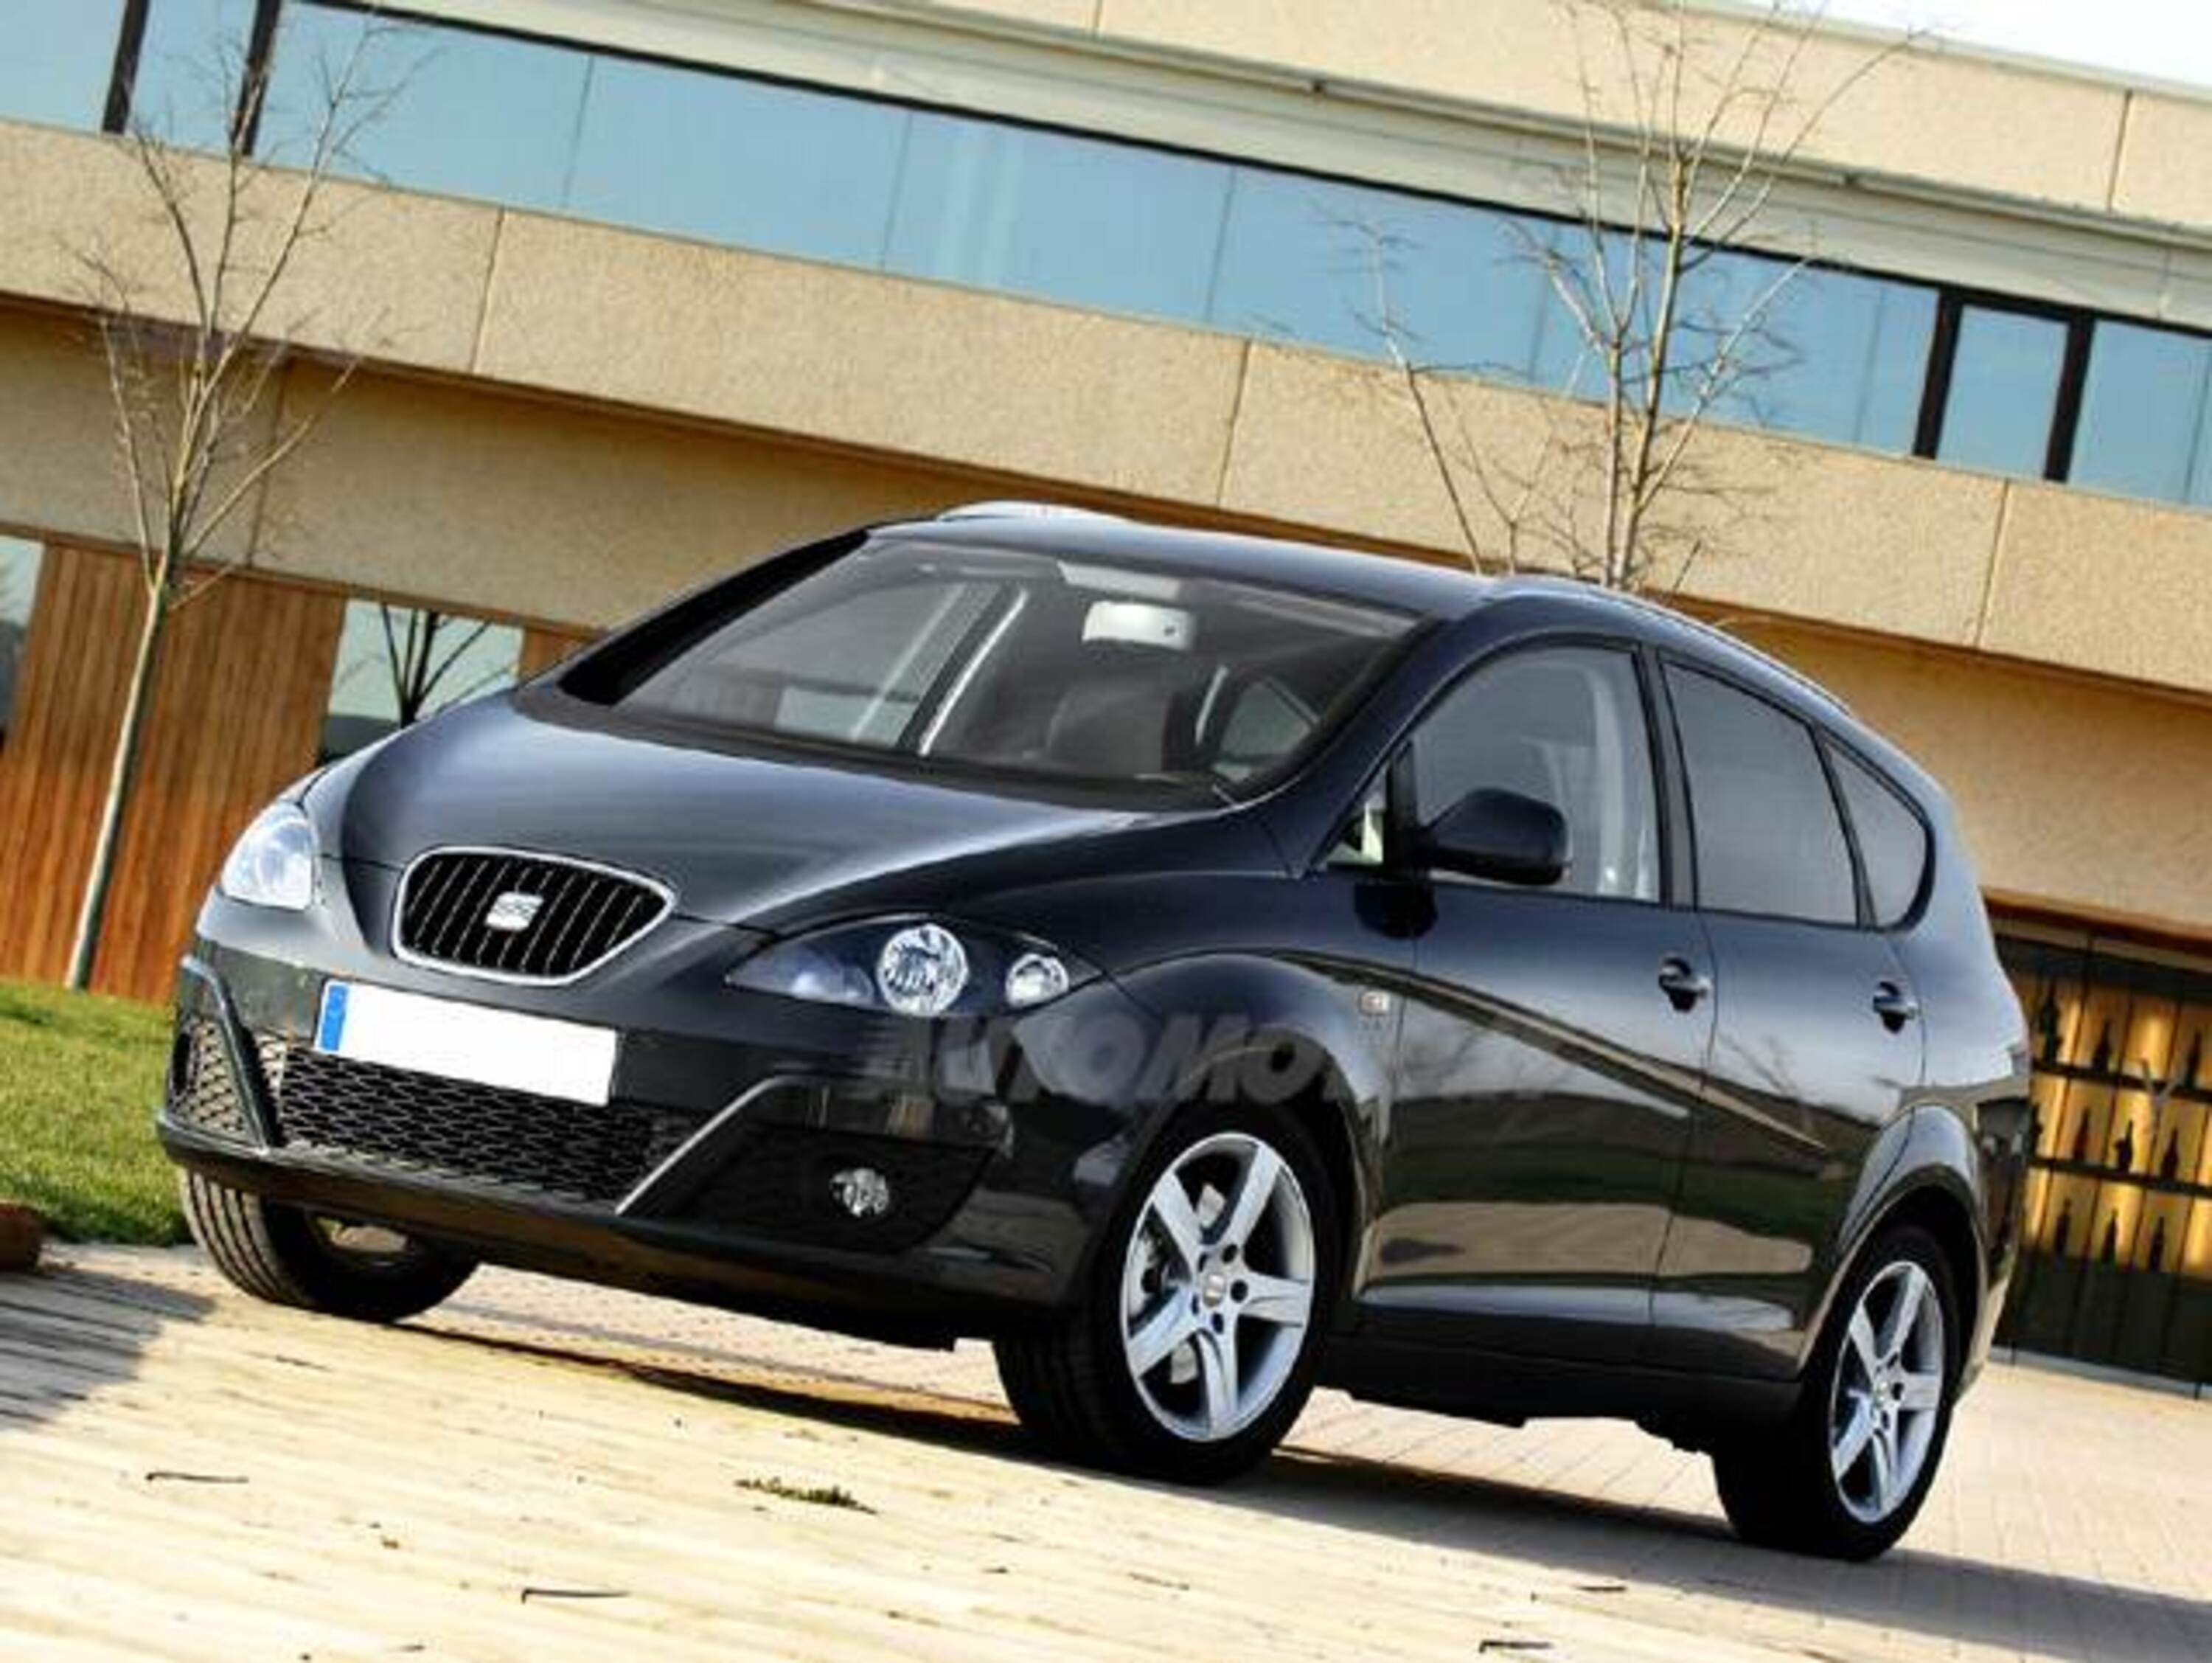 SEAT Altea XL 1.6 Reference (MY09)